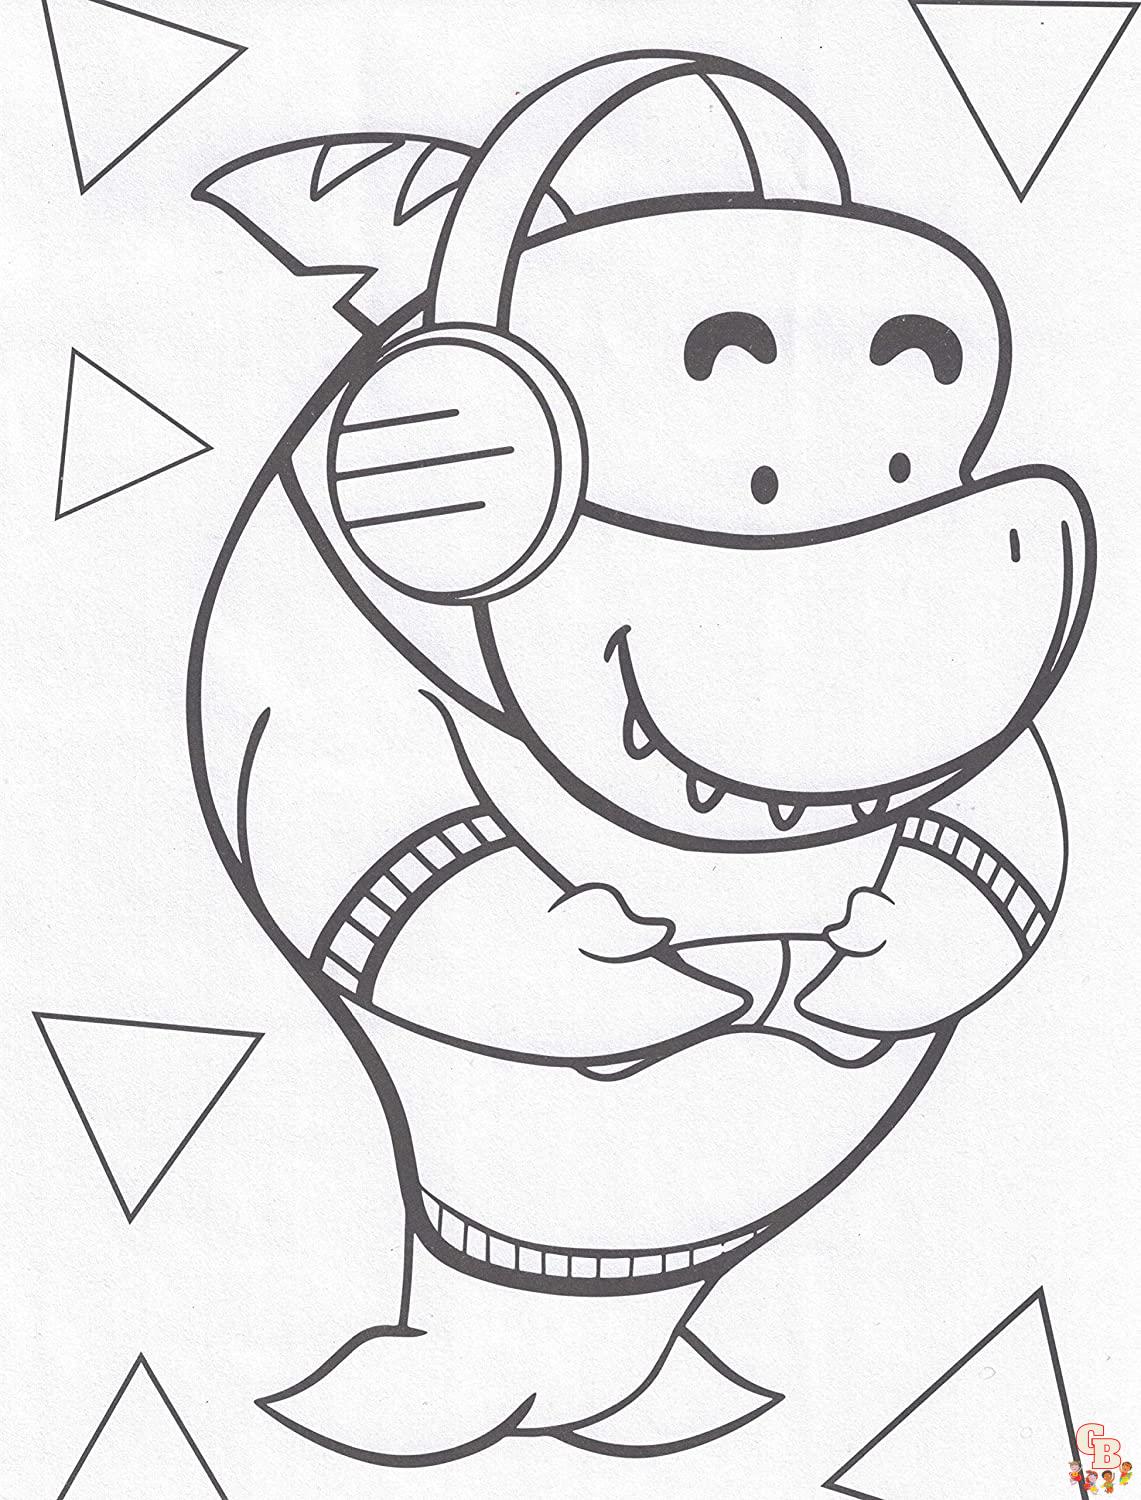 Ryan Coloring Pages